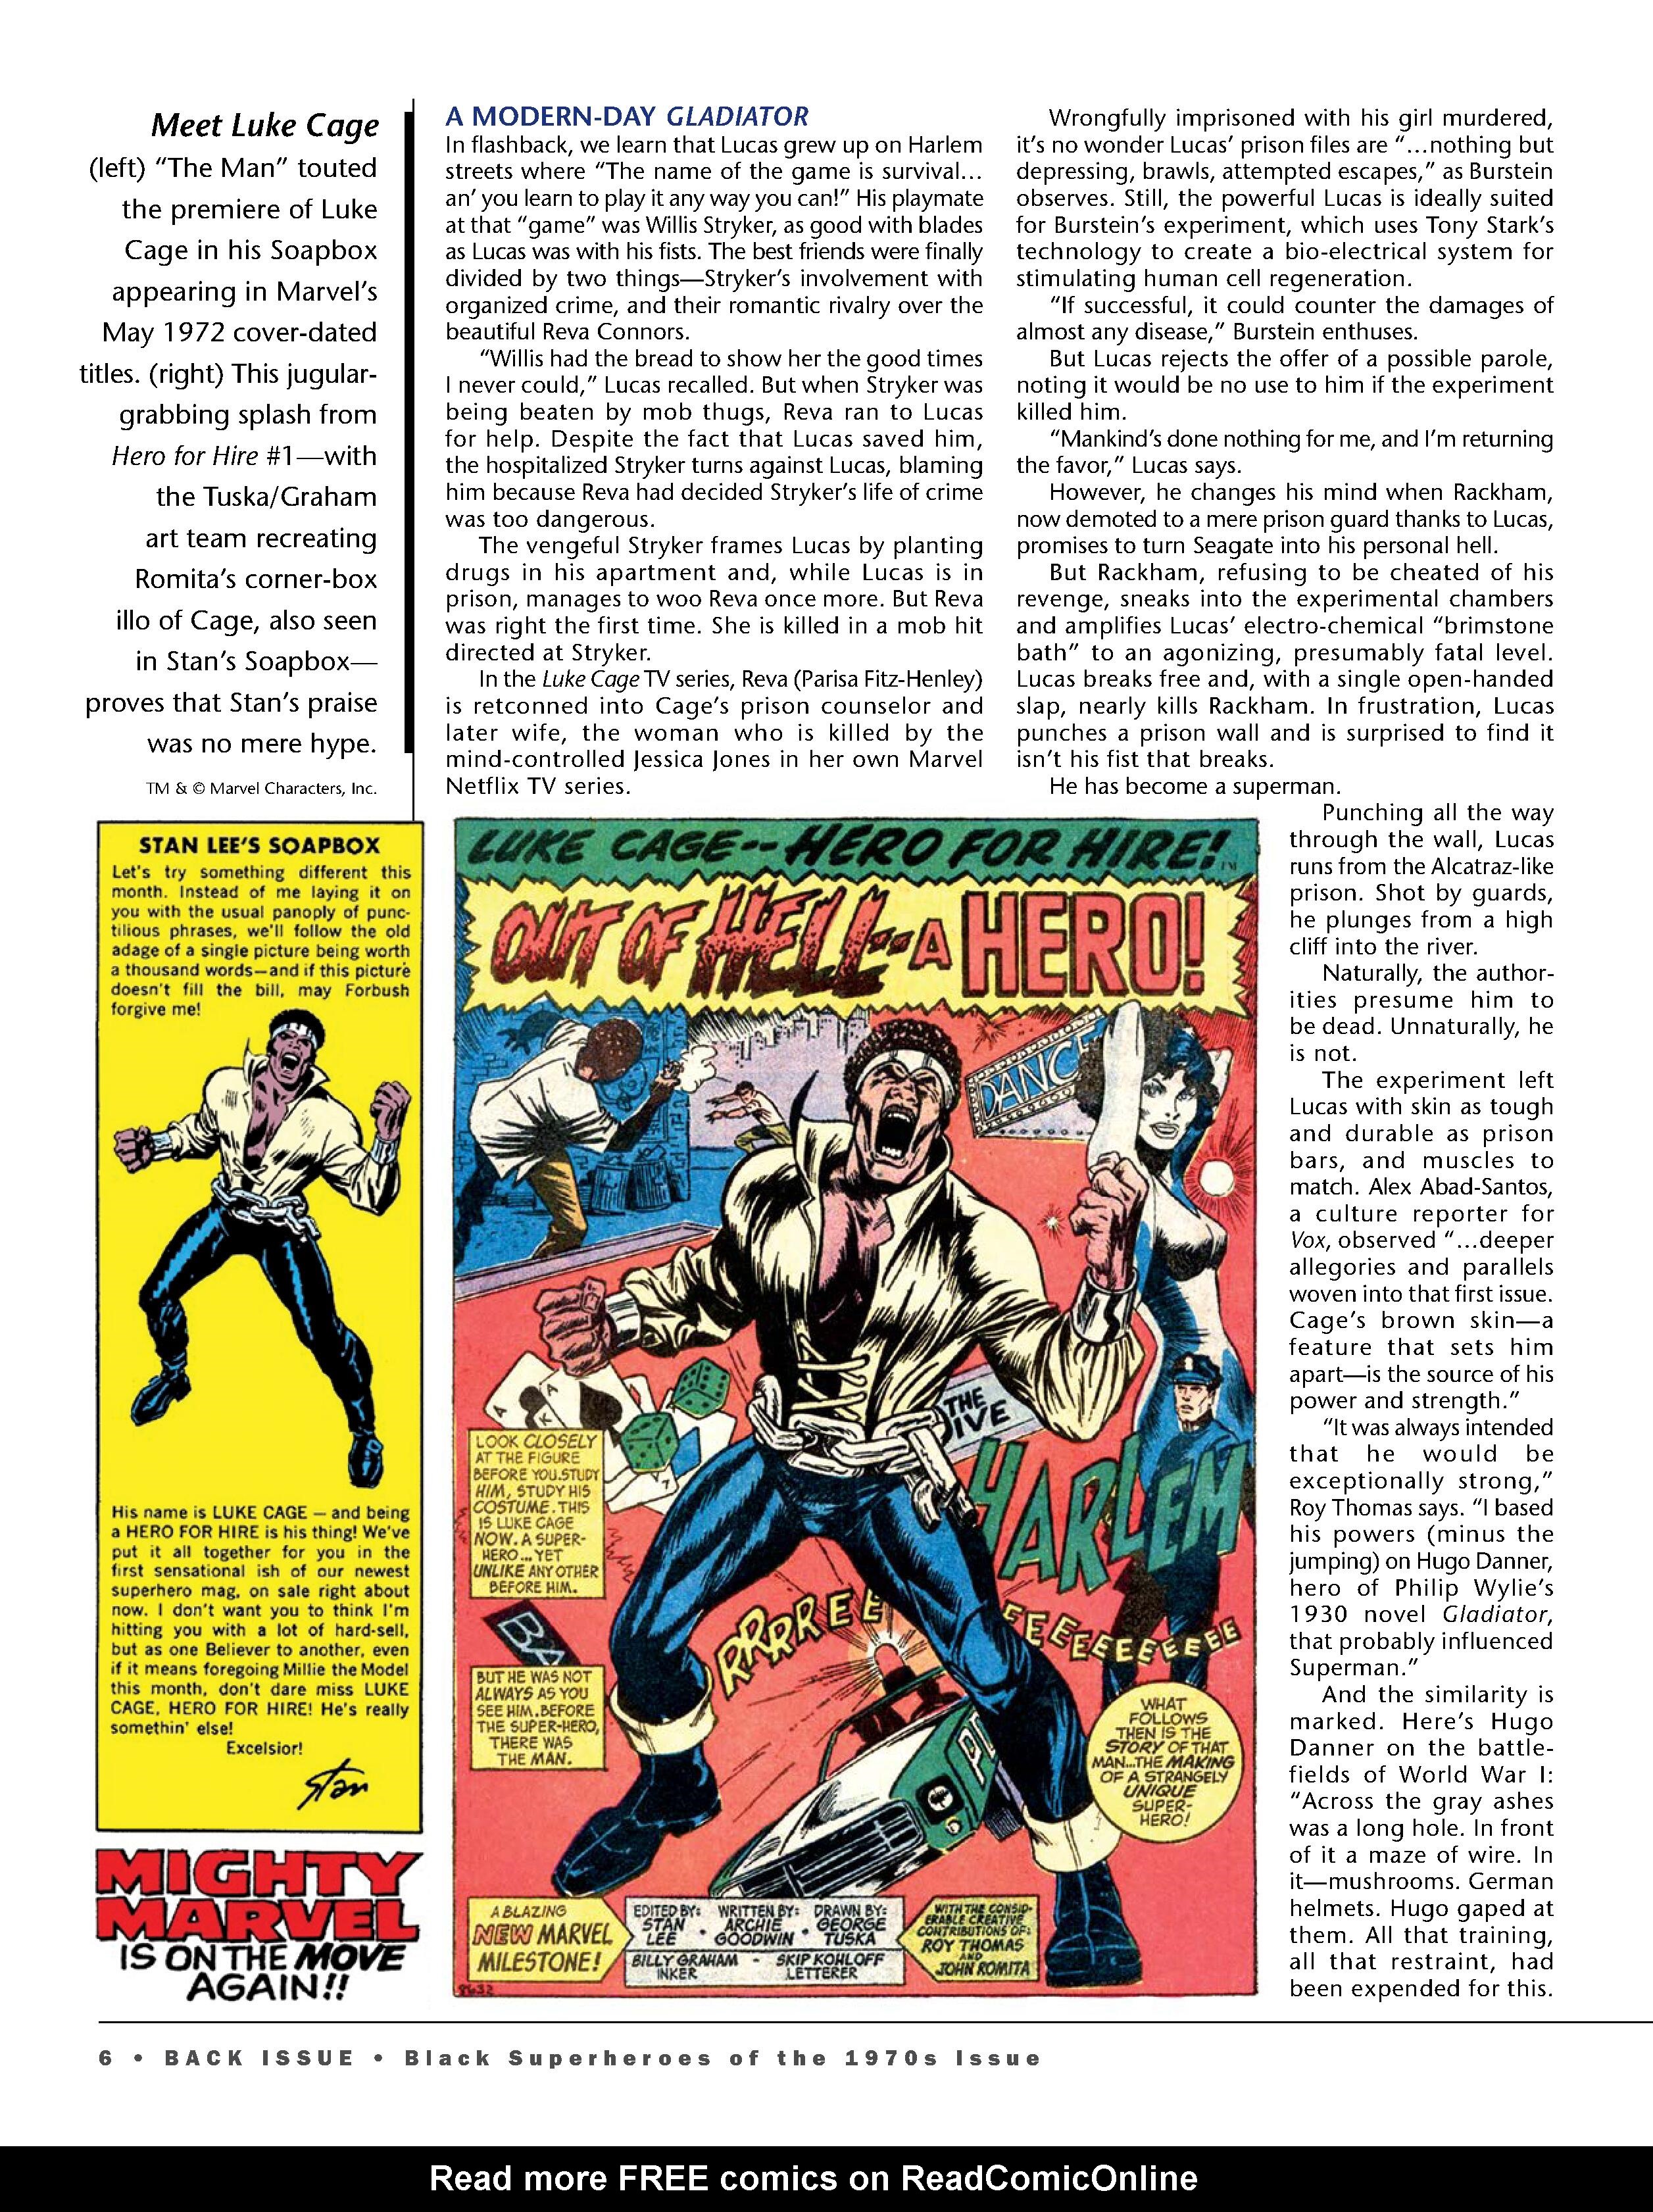 Read online Back Issue comic -  Issue #114 - 8